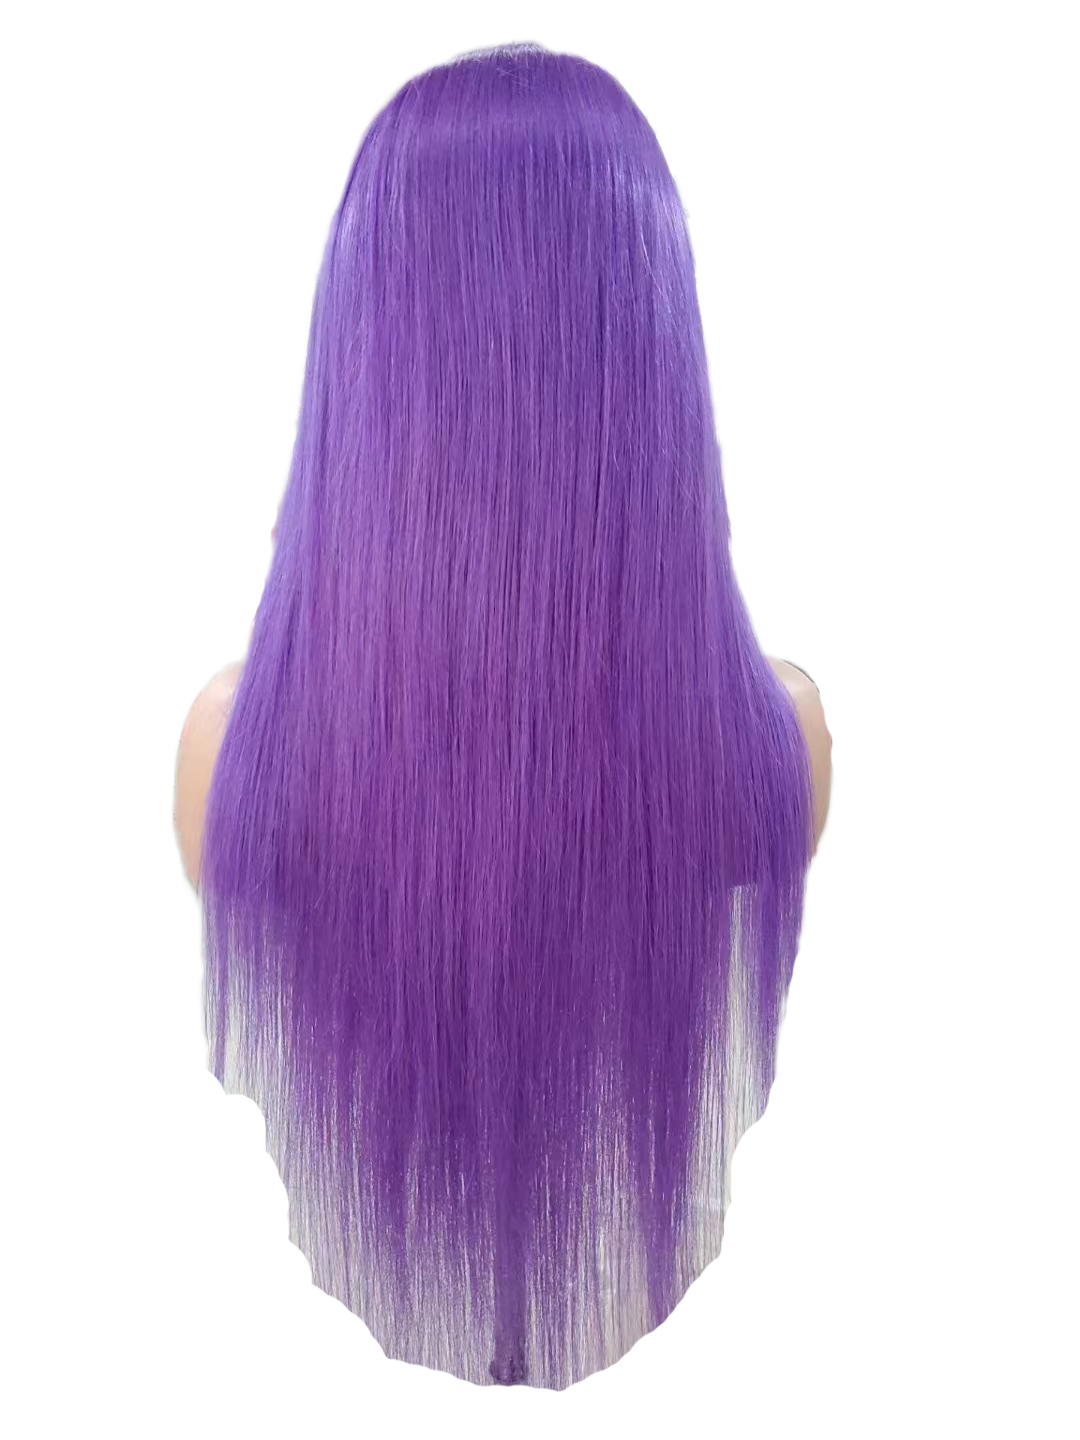 Do you like this lenght and this color wigs?